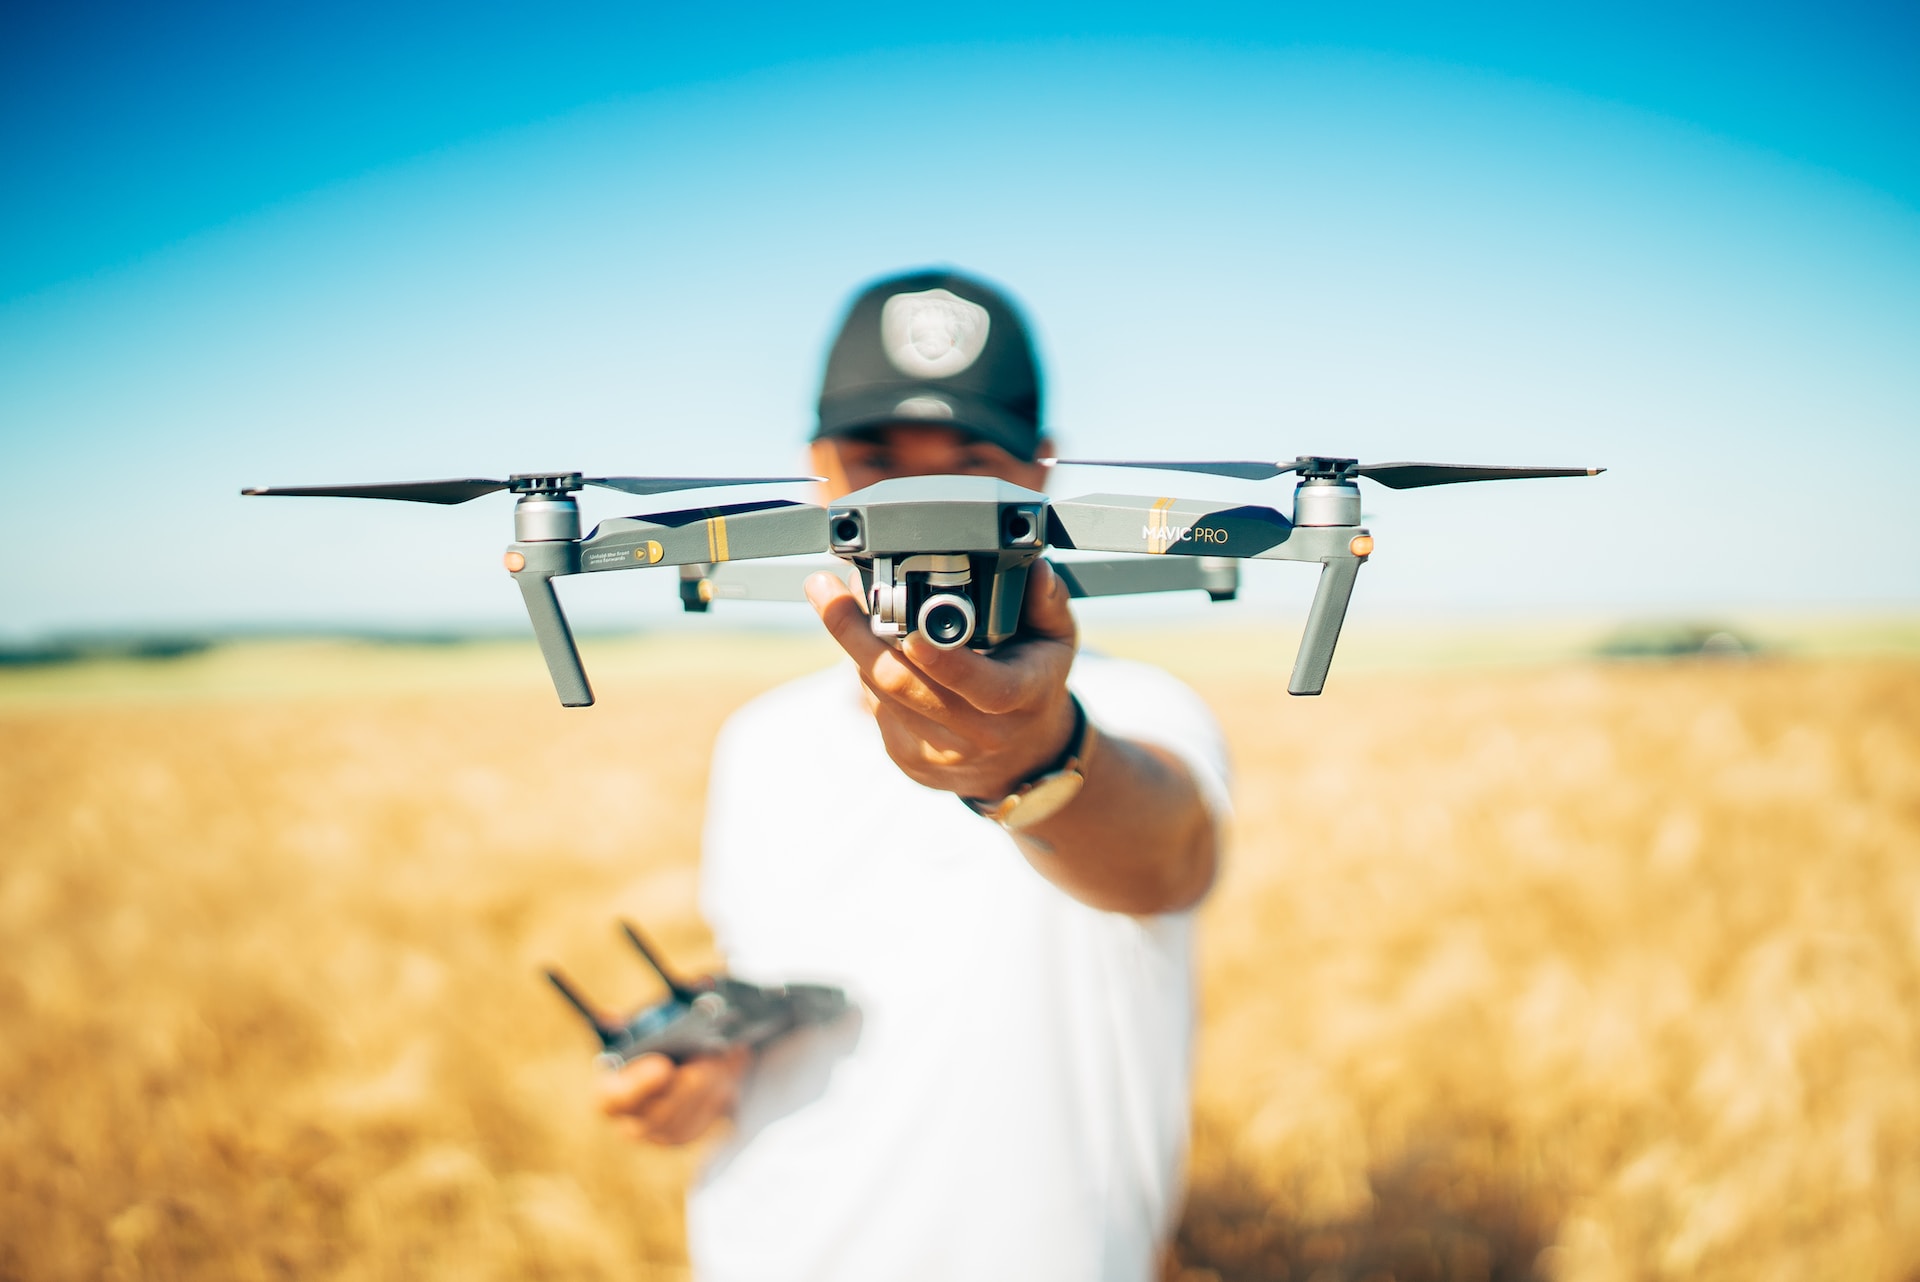 Top 5 Benefits of Using Drones for Real Estate Photography